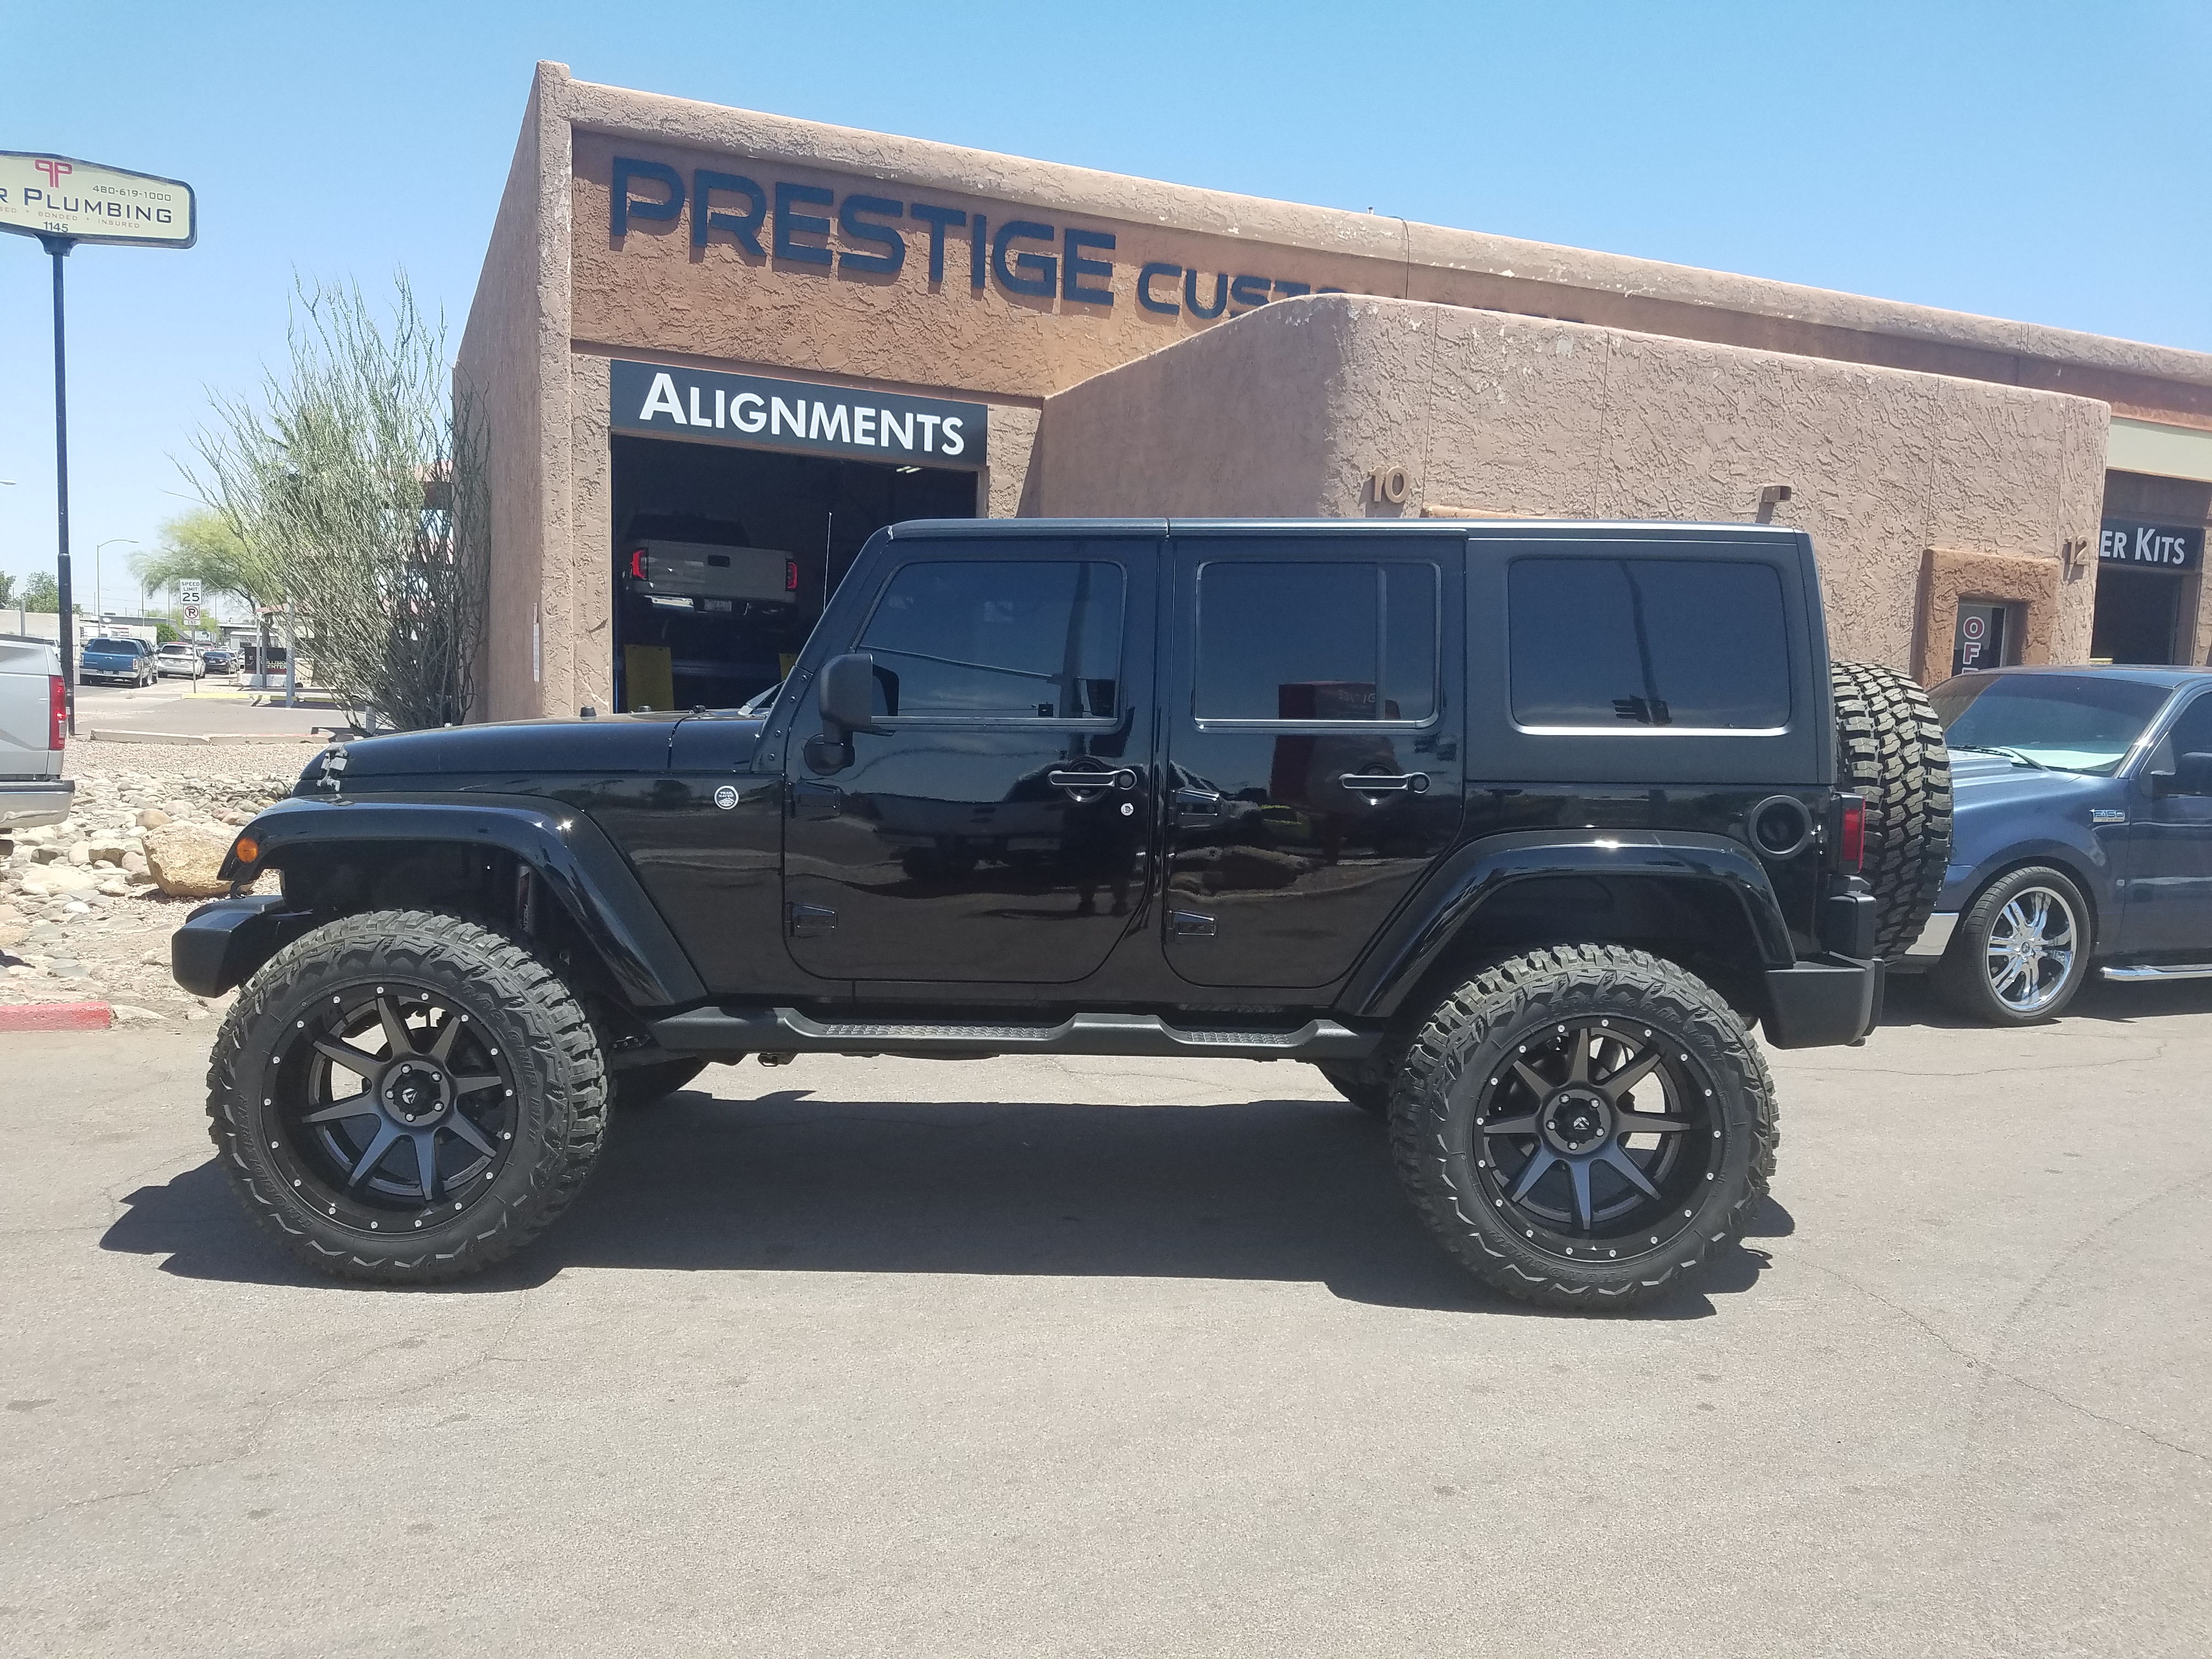 2008 JEEP JK UNLIMITED WITH A 4 ROUGH COUNTRY SUSPENSION LIFT KTI AND A SET  OF FUEL WHEELS 22X12 AND THUNDER MTS 37X13 (2) - Prestige Custom Rides  (480) 733-4303